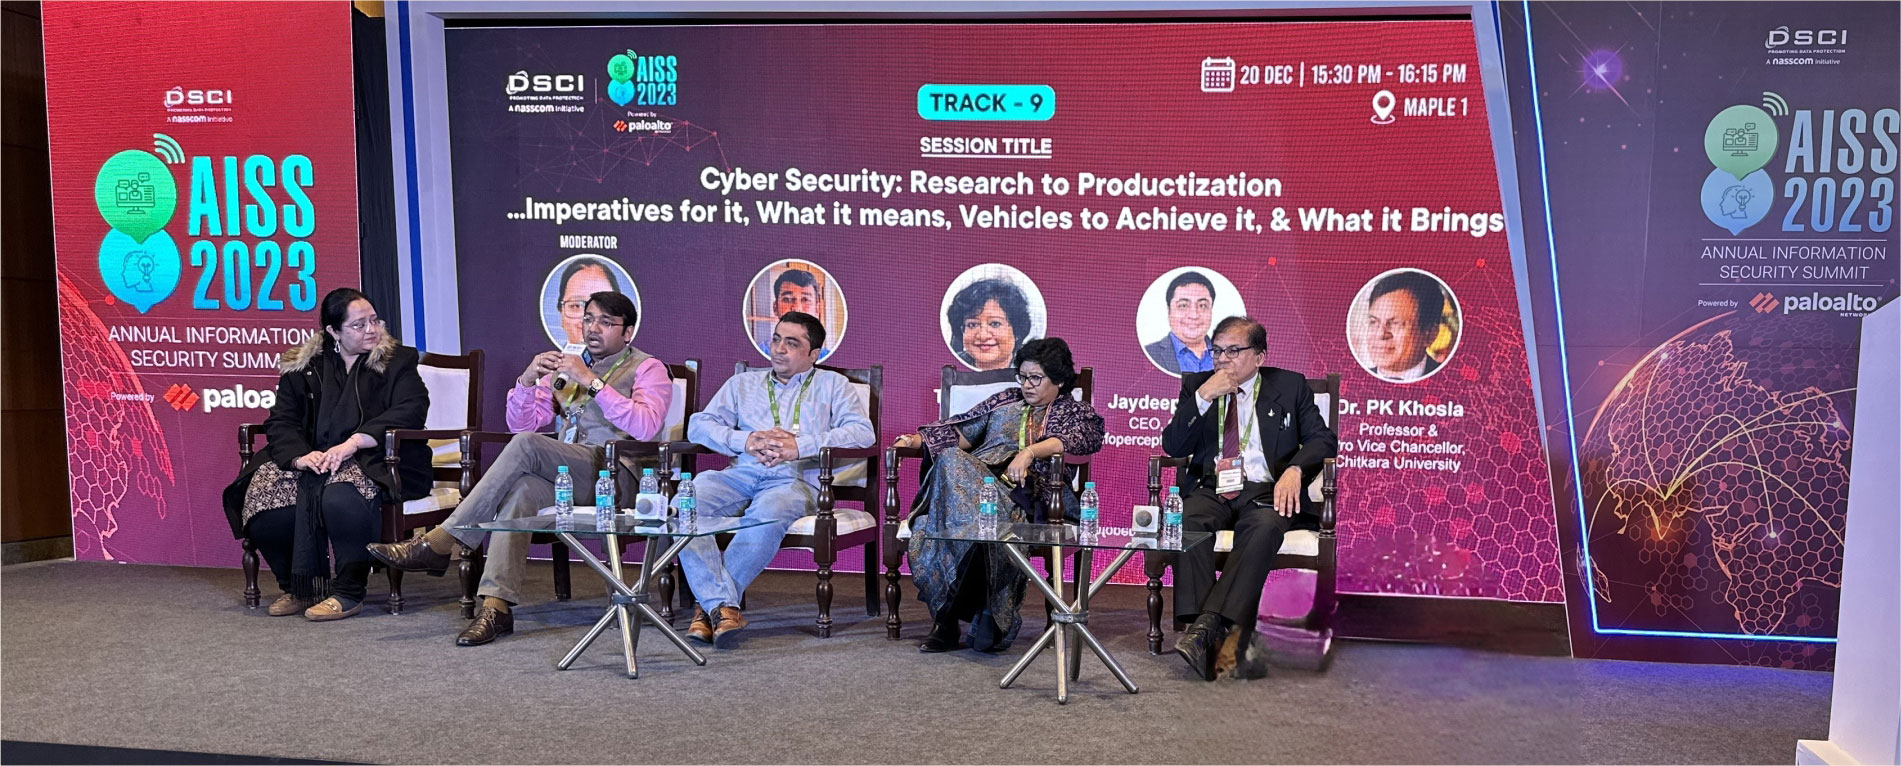 Cyber Security at AISS 2023 - Chitkara University